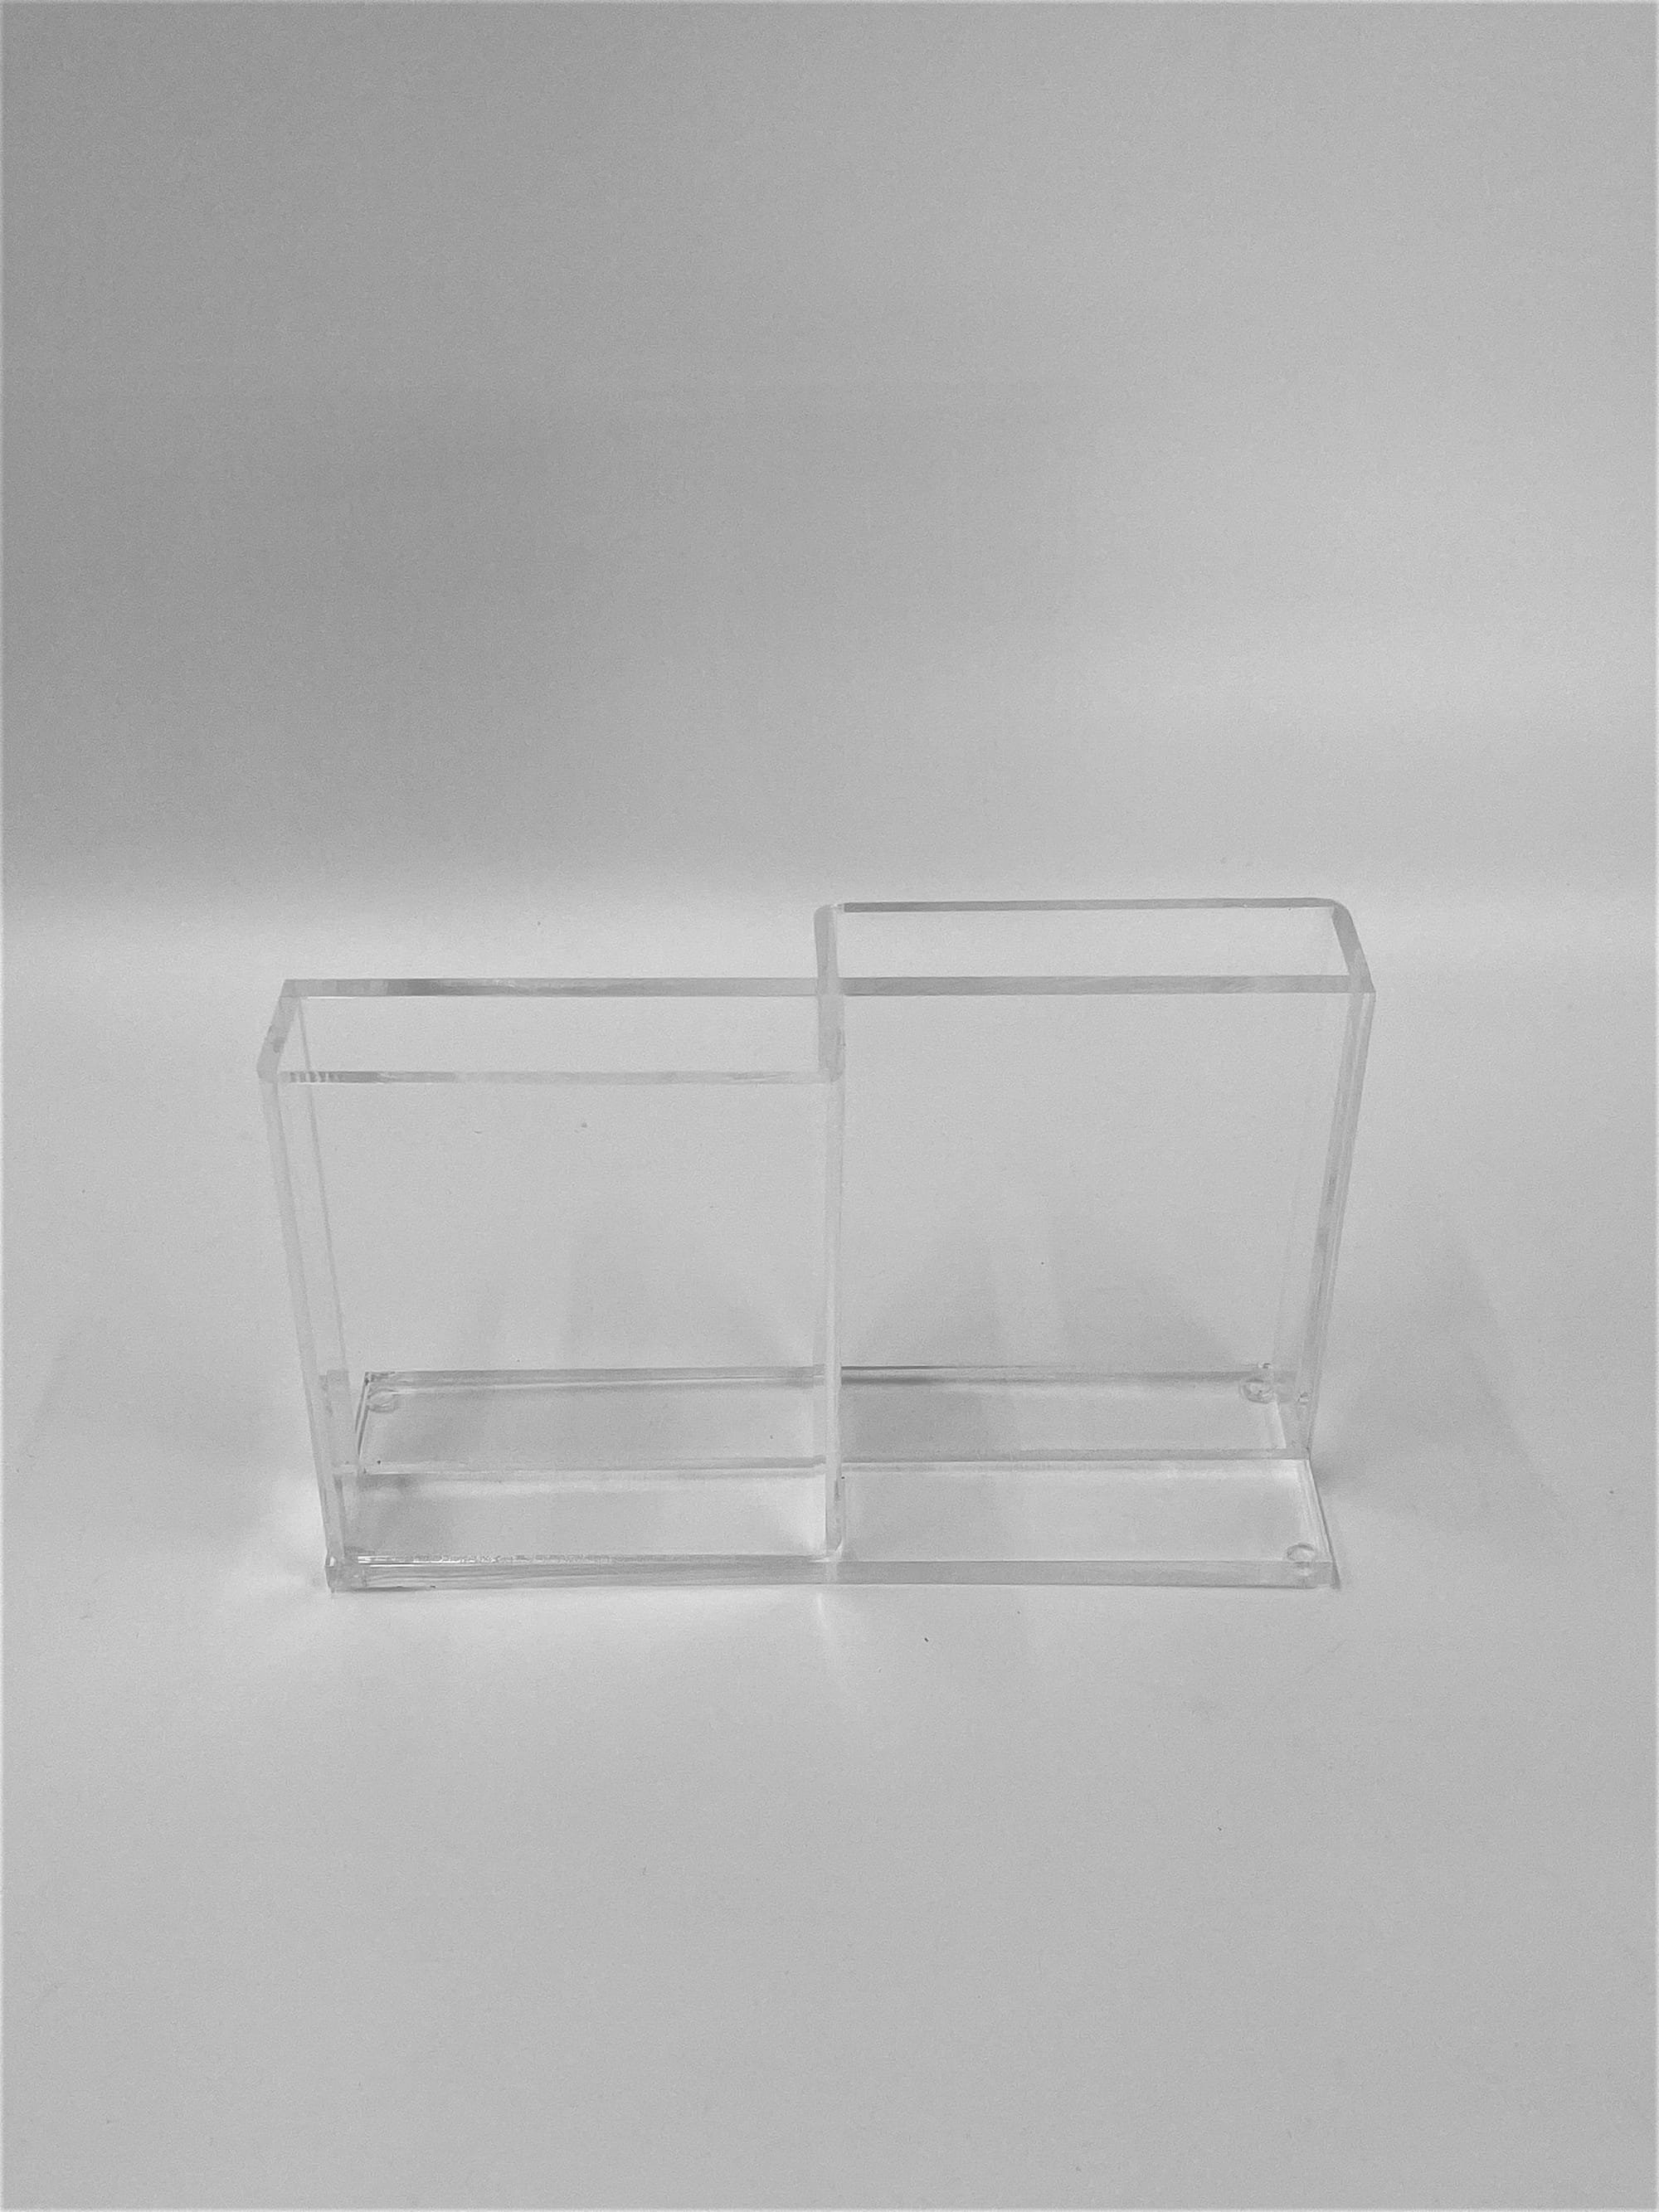 Clear acrylic box wholesale, clear plastic display boxes with lids